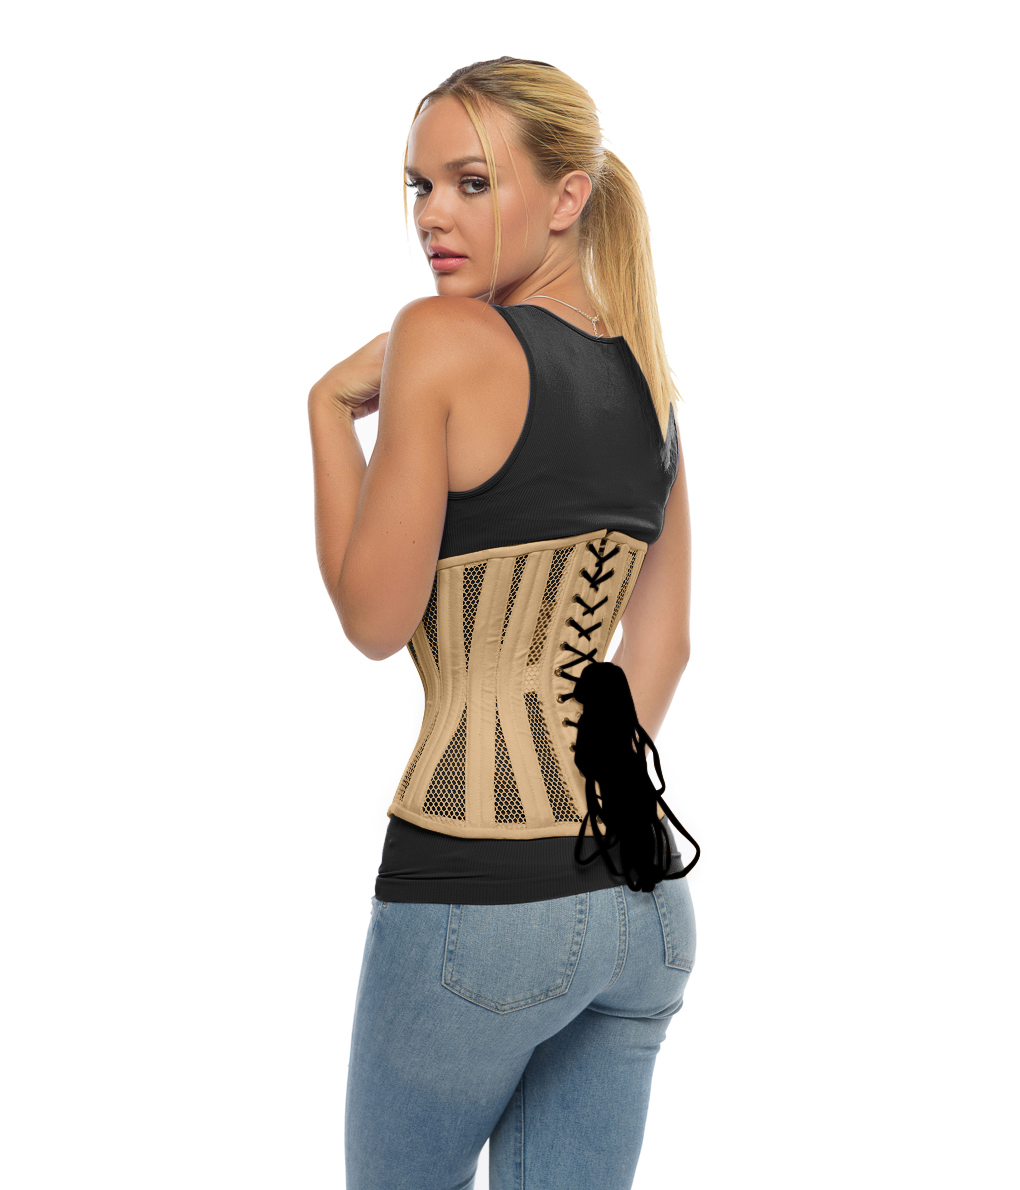 Backless Lace-up Corset Top - Beige – LibertyR0se